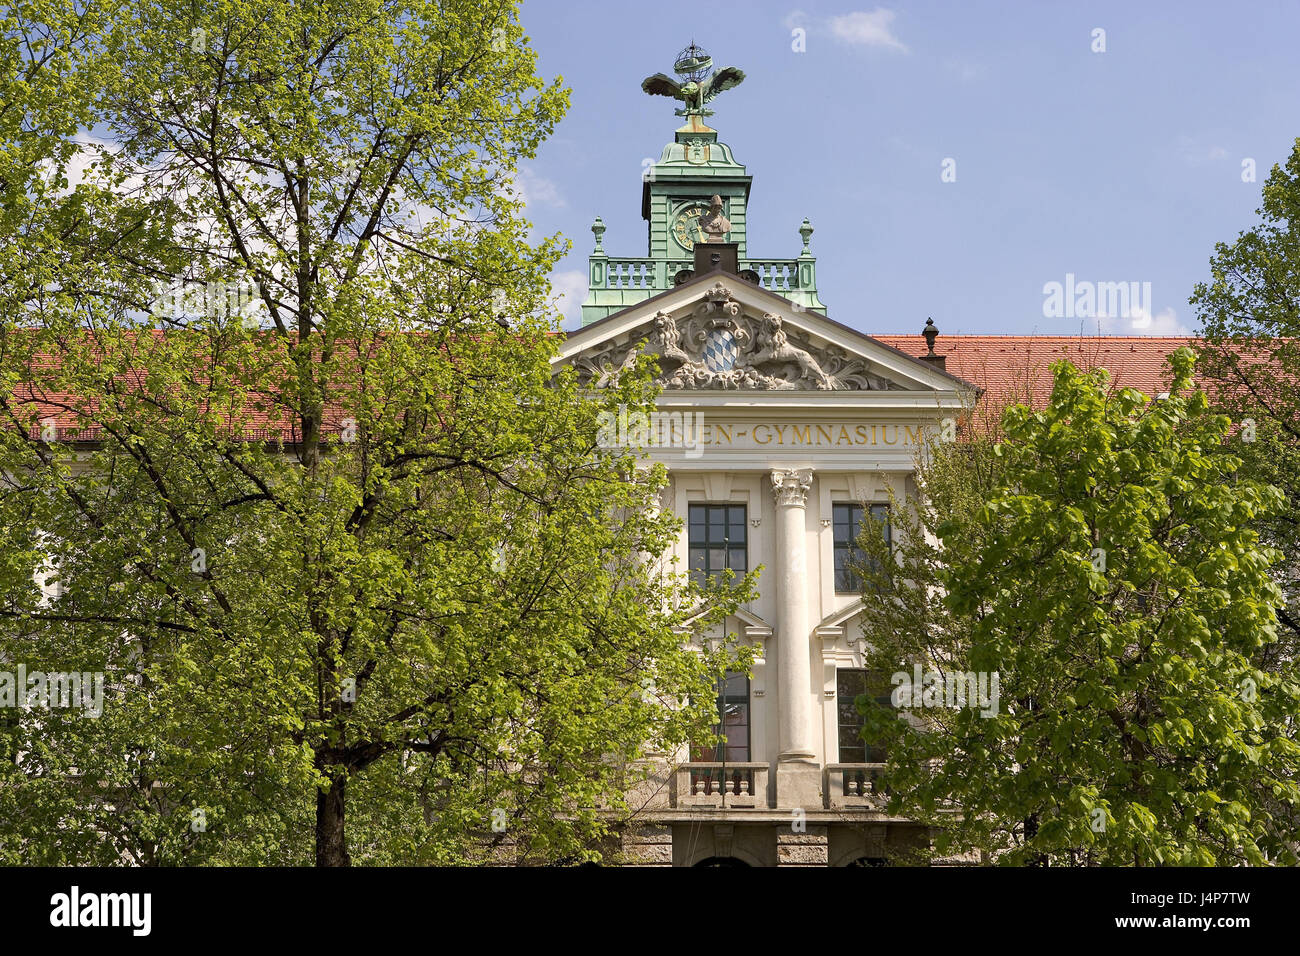 Germany, Bavaria, Munich, Theresien high school, outside, town, Ludwig's suburb, imperial Ludwig's square, building, school, Theresiengymnasium, high school, facade, school education, education, architecture, trees, green, nobody, Stock Photo